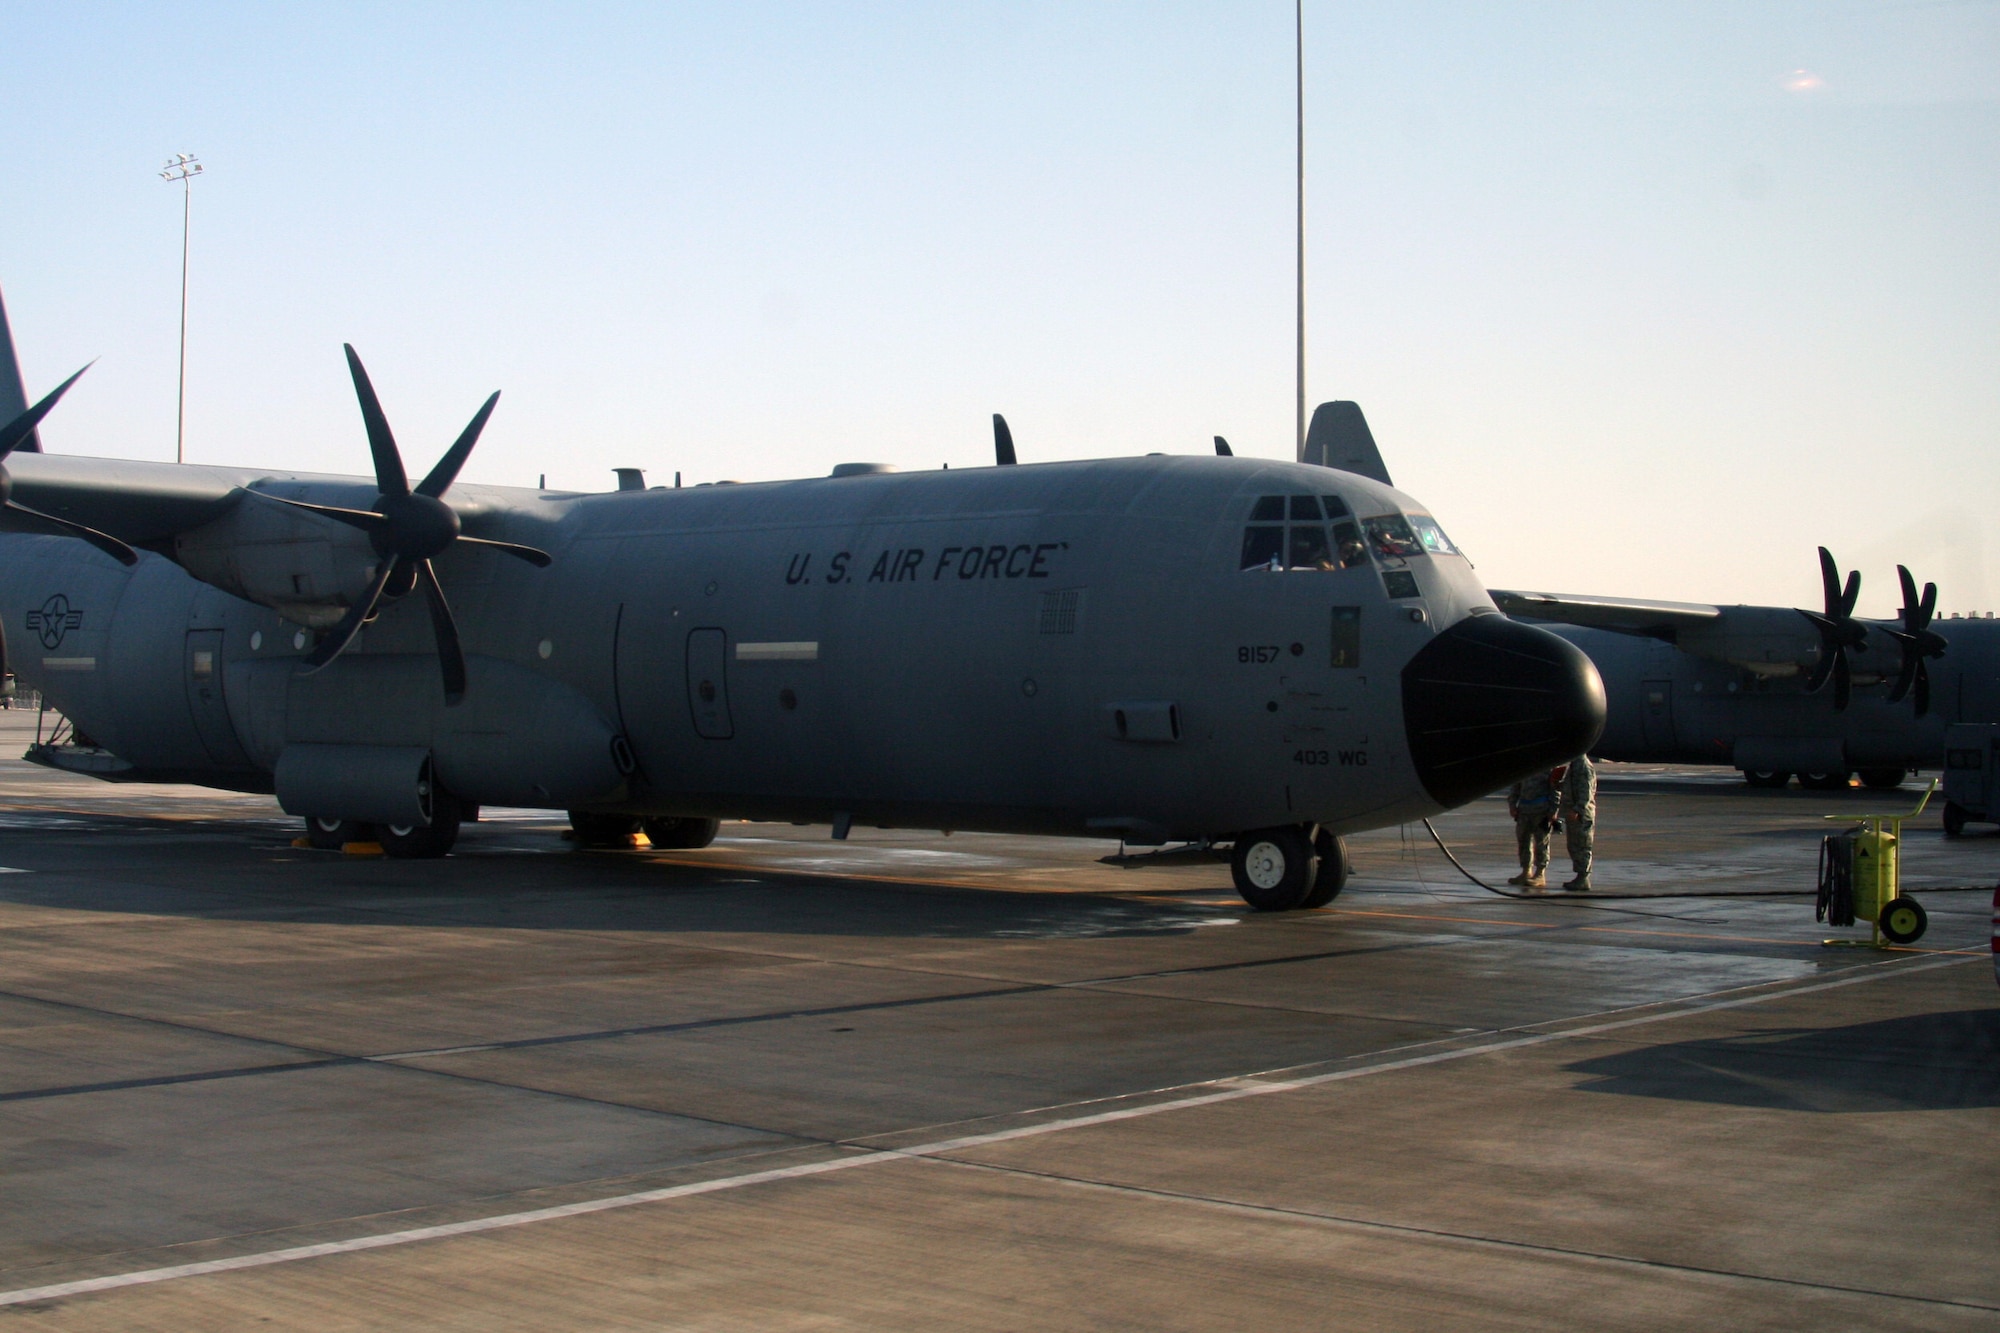 A C-130J Hercules prepares for a mission for Operation Enduring Freedom at an undisclosed base in Southwest Asia on Dec. 25, 2009. The C-130 is one of the lead airlift aircraft the Air Force and Air Mobility Command uses to "fly, fight and win...in air, space and cyberspace." (U.S. Air Force Photo/Tech. Sgt. Scott T. Sturkol)